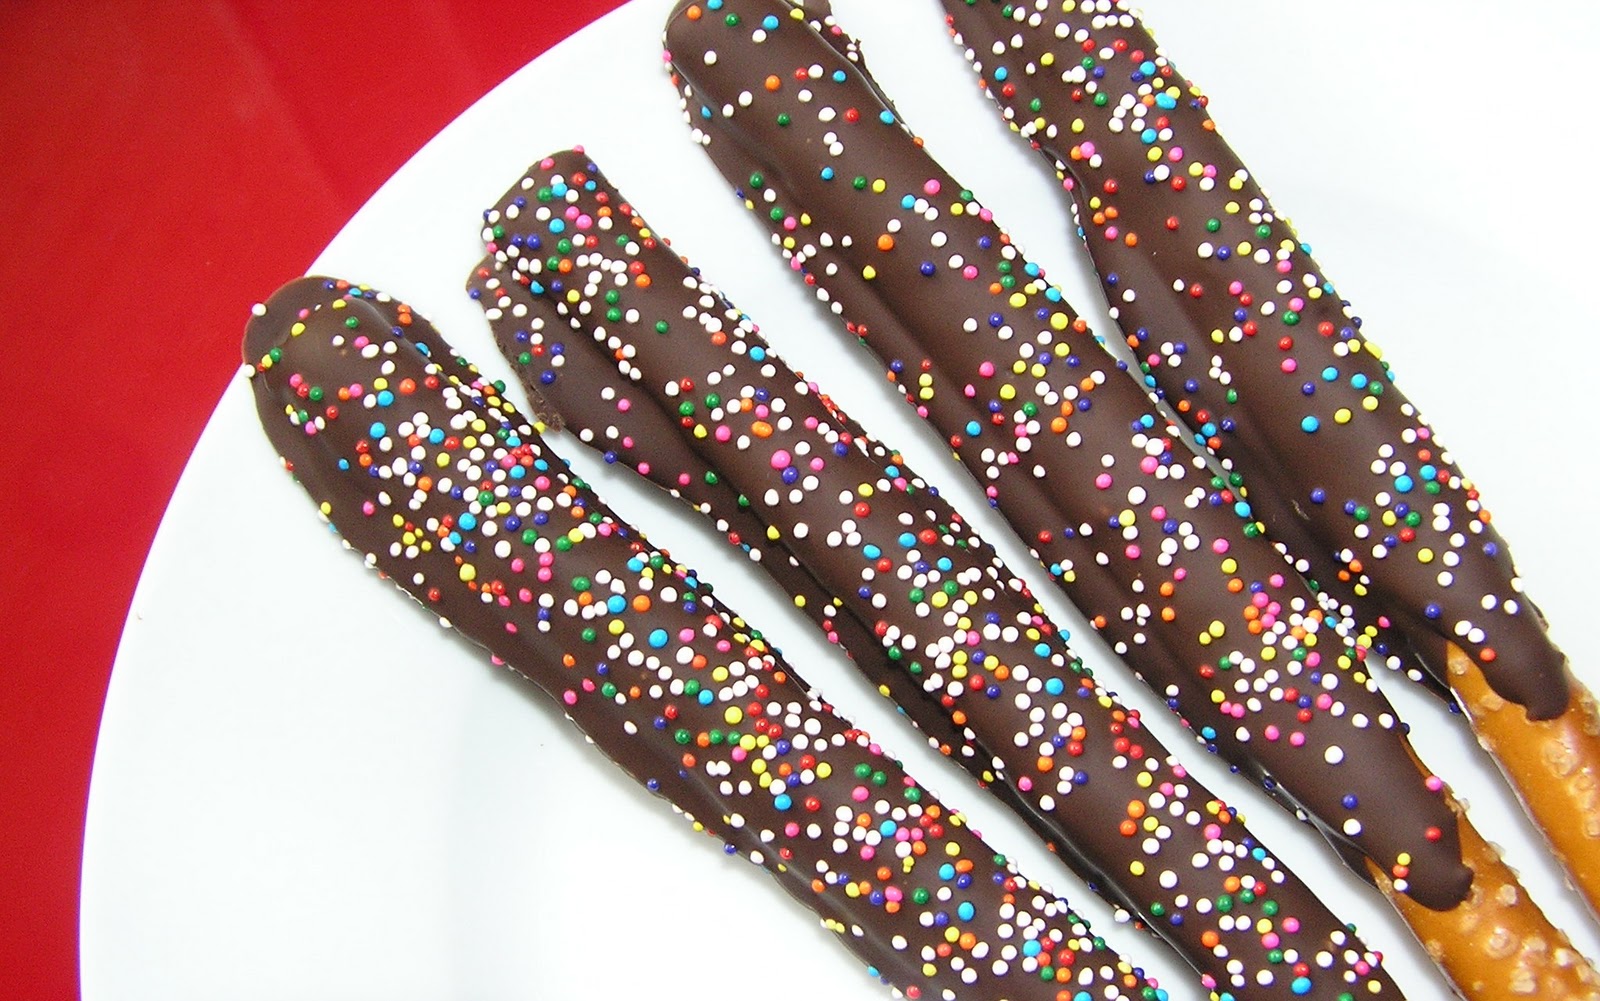 The Allergy Safe Kitchen: Chocolate Covered Pretzel Rods